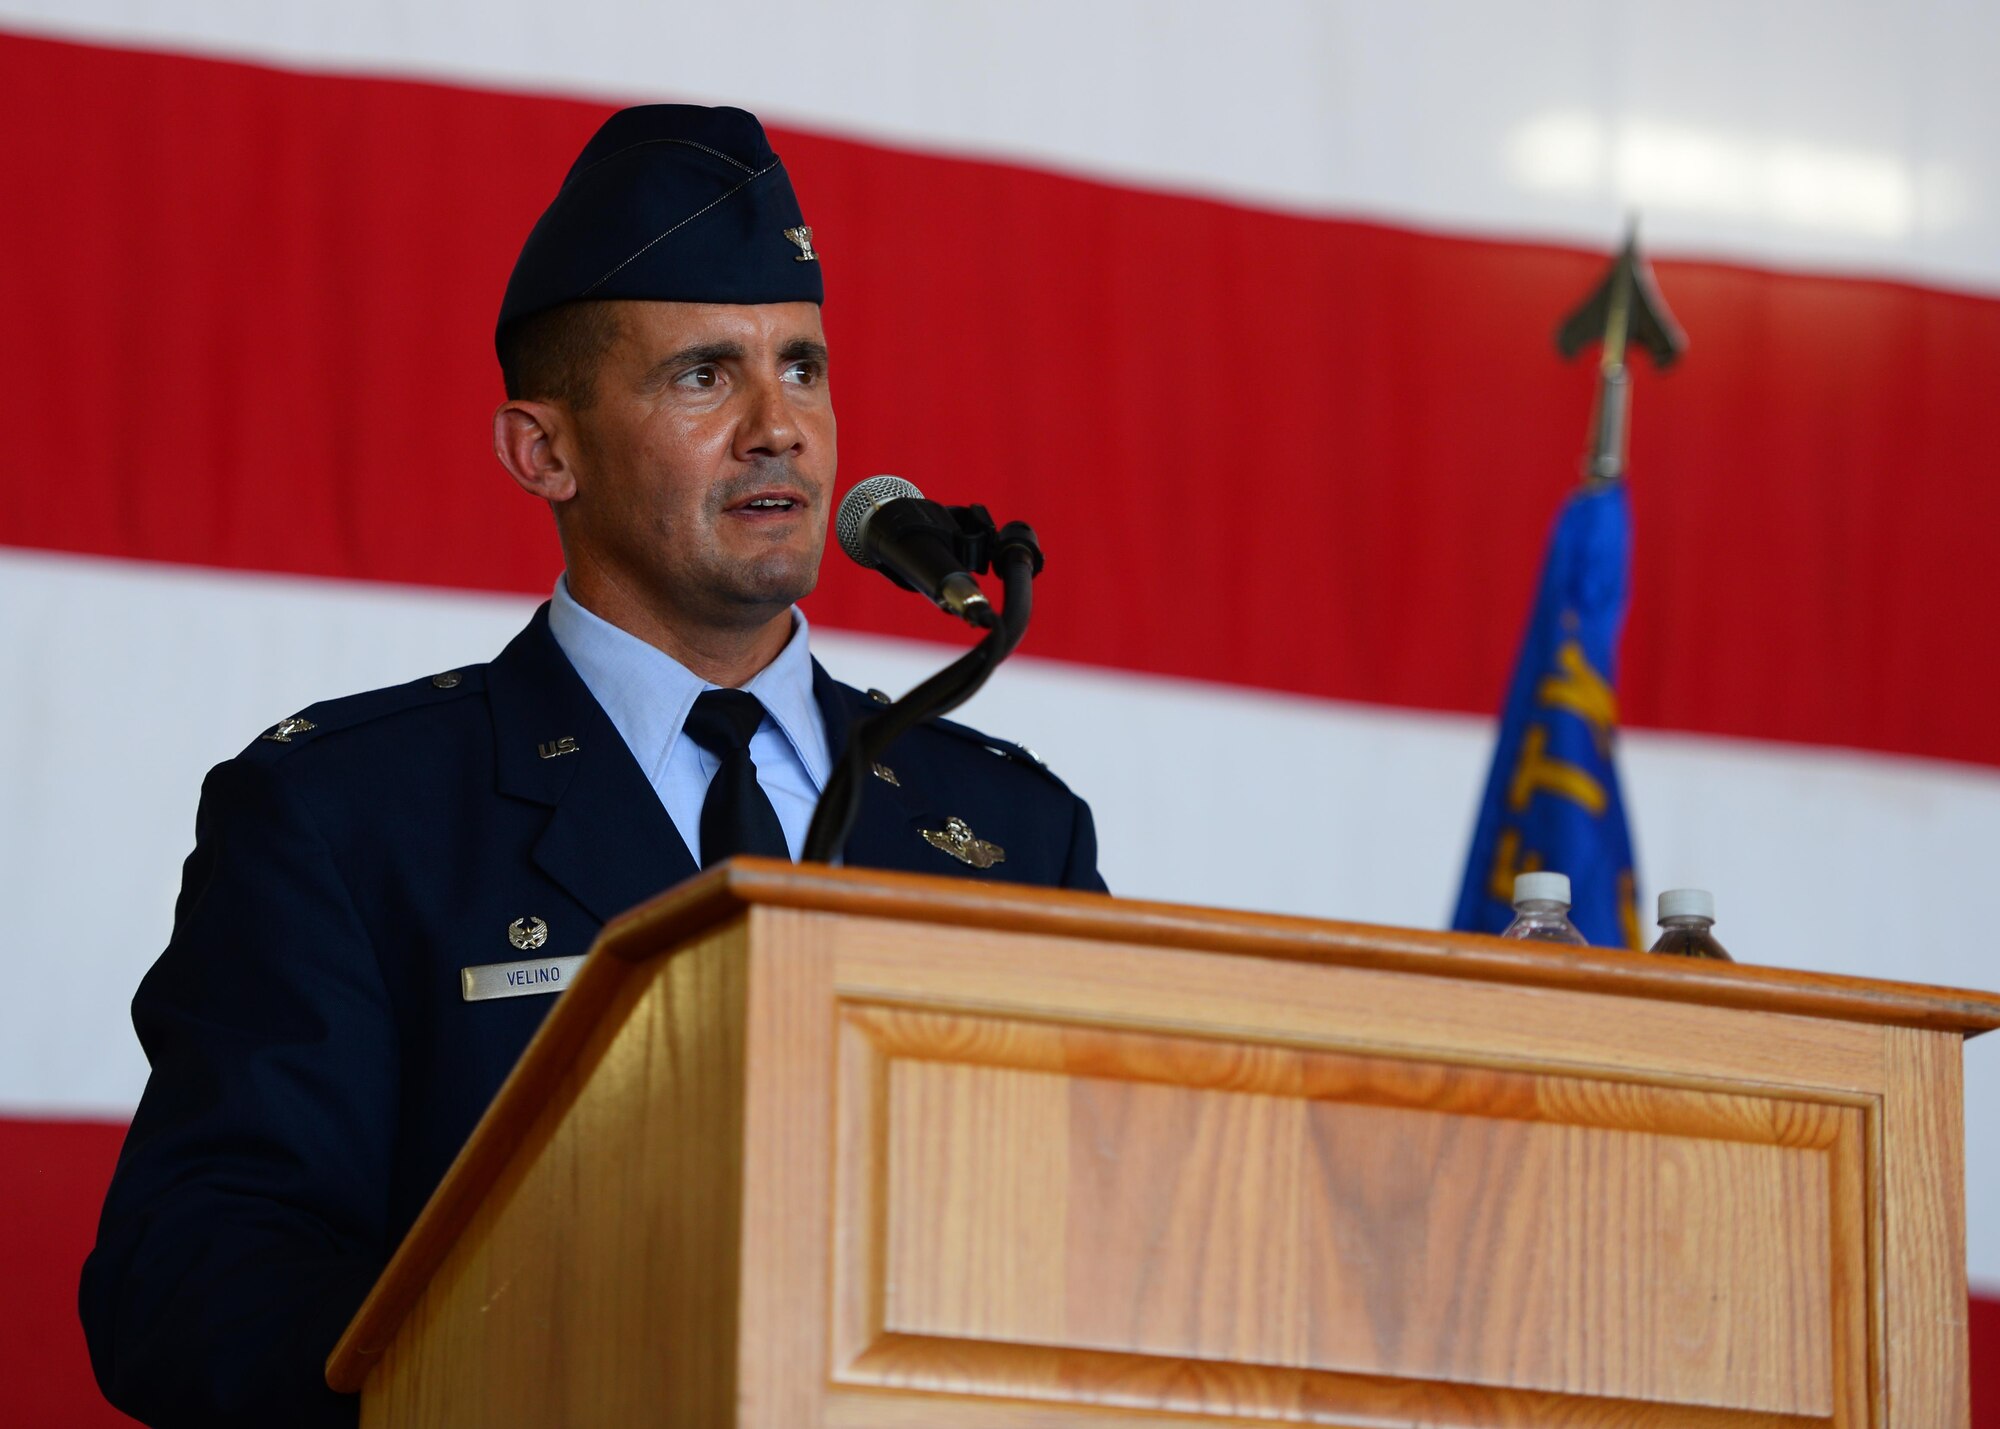 U.S. Air Force Col. Charles Velino, incoming 47th Flying Training Wing commander, speaks to those attending the wing’s change of command ceremony at Laughlin Air Force Base, Tx., June 28, 2017. Col. Velino, is the former 15th Operations Group commander at Joint Base Pearl Harbor-Hickam, Hawaii, and is a former Laughlin undergraduate pilot trainee.